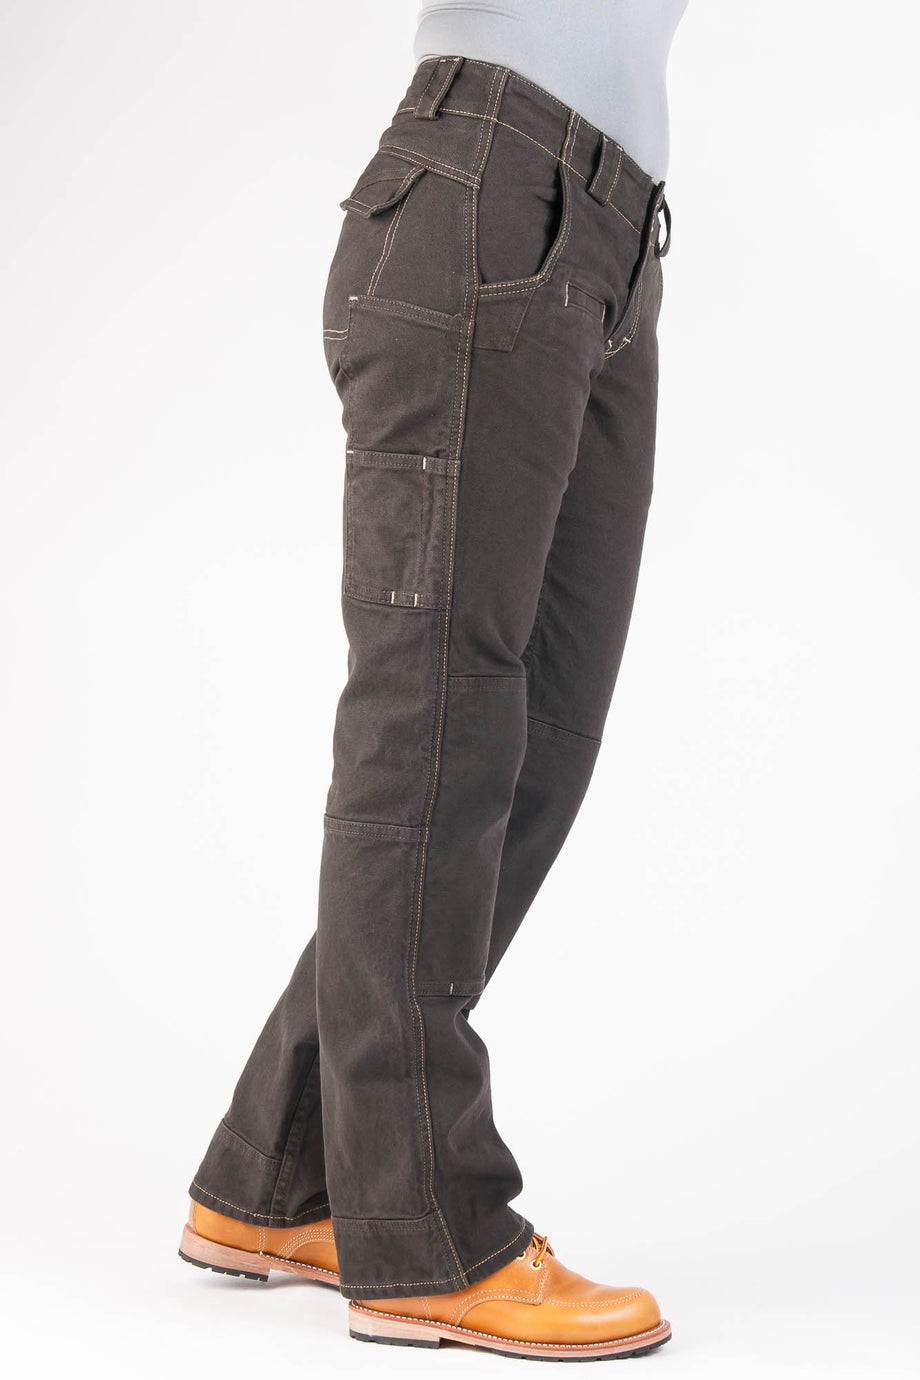 Dovetail Workwear Women's Grey Canvas Work Pants (14 X 30) in the Pants  department at